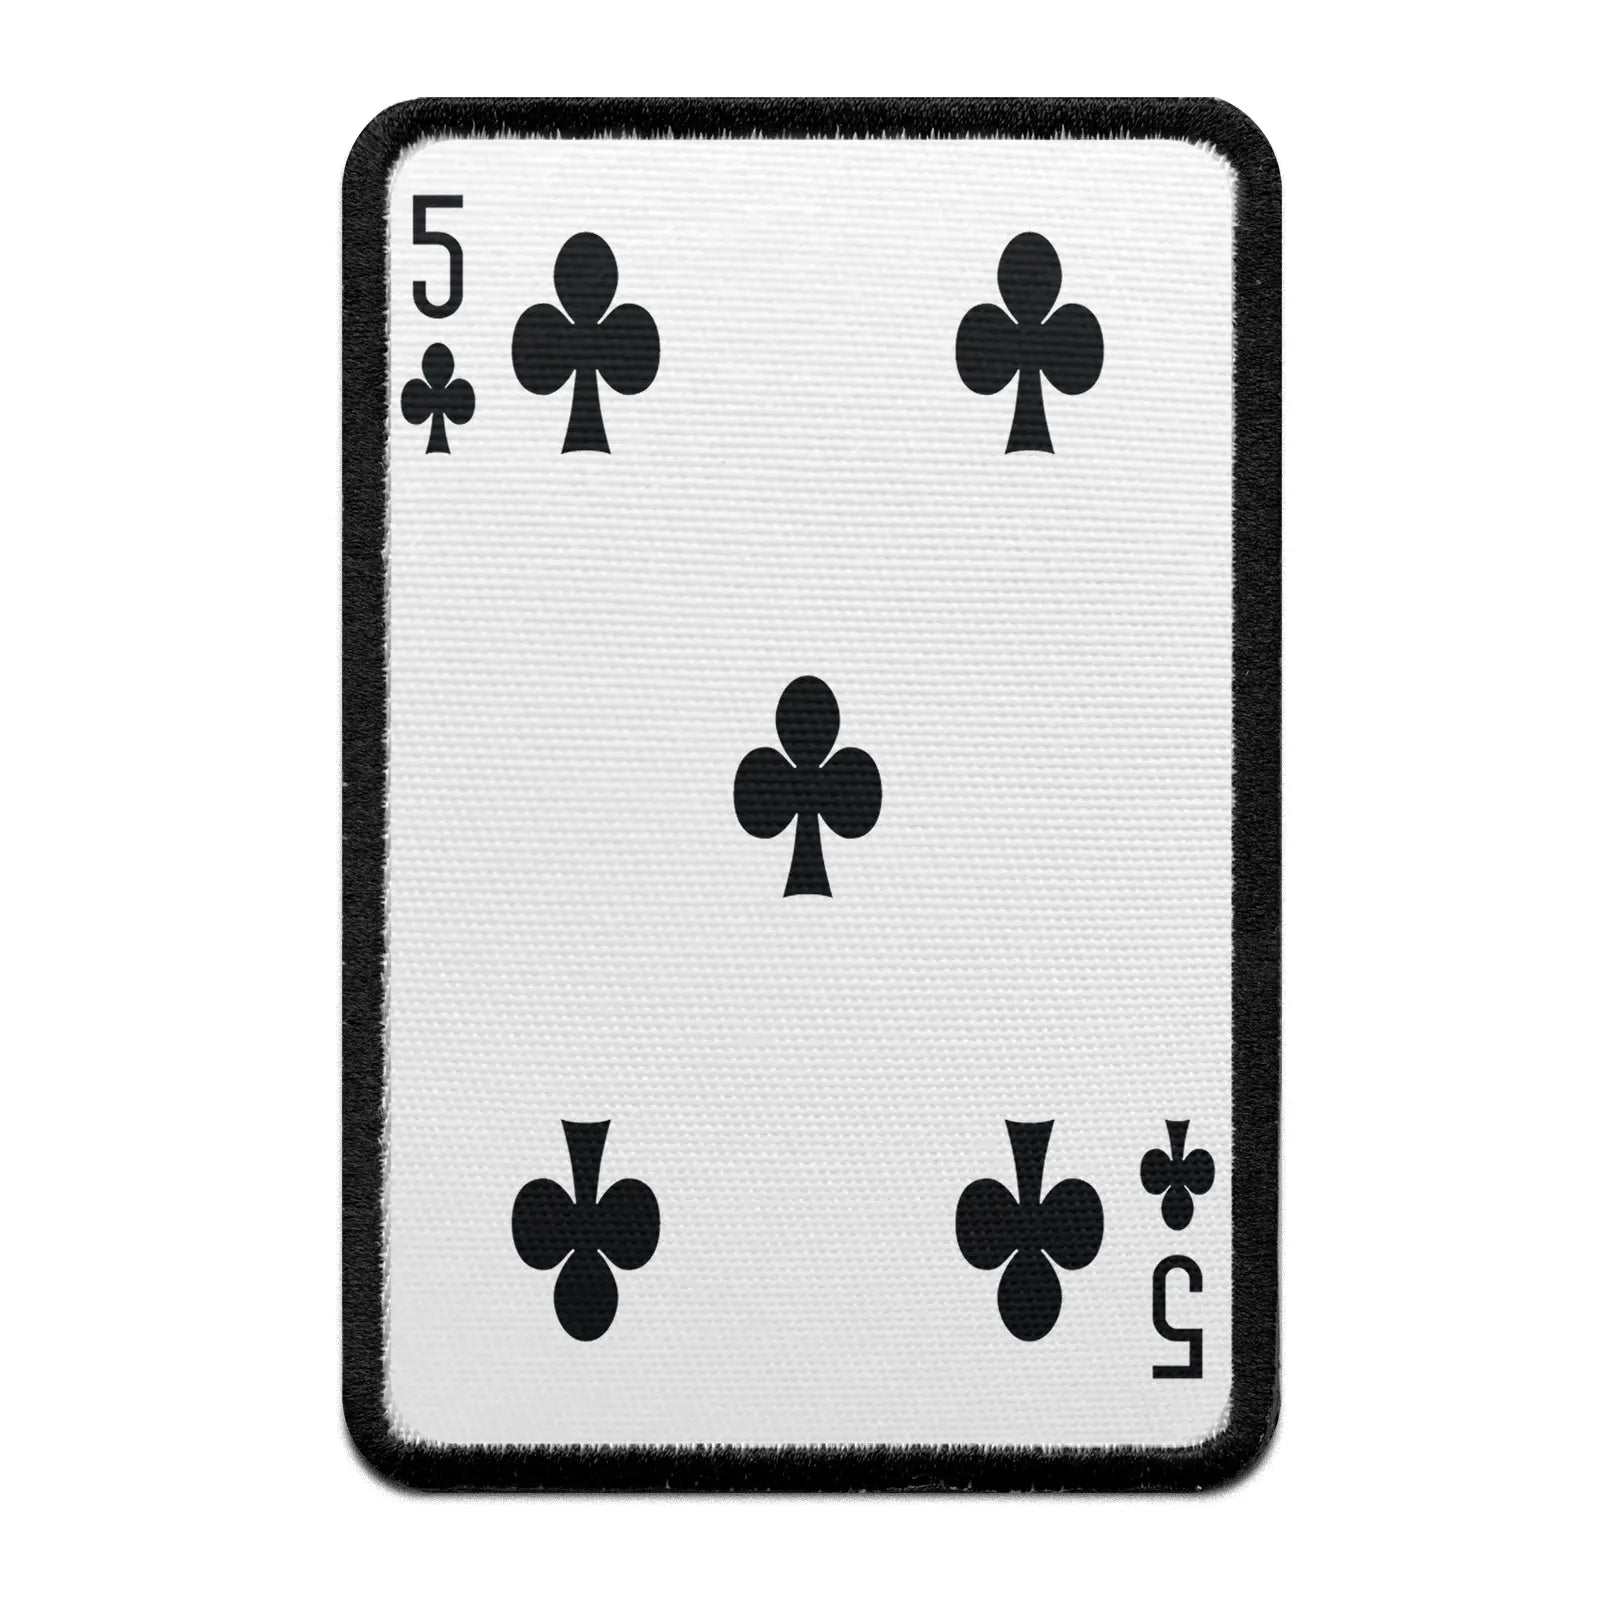 Five Of Clubs Card FotoPatch Game Deck Embroidered Iron On 